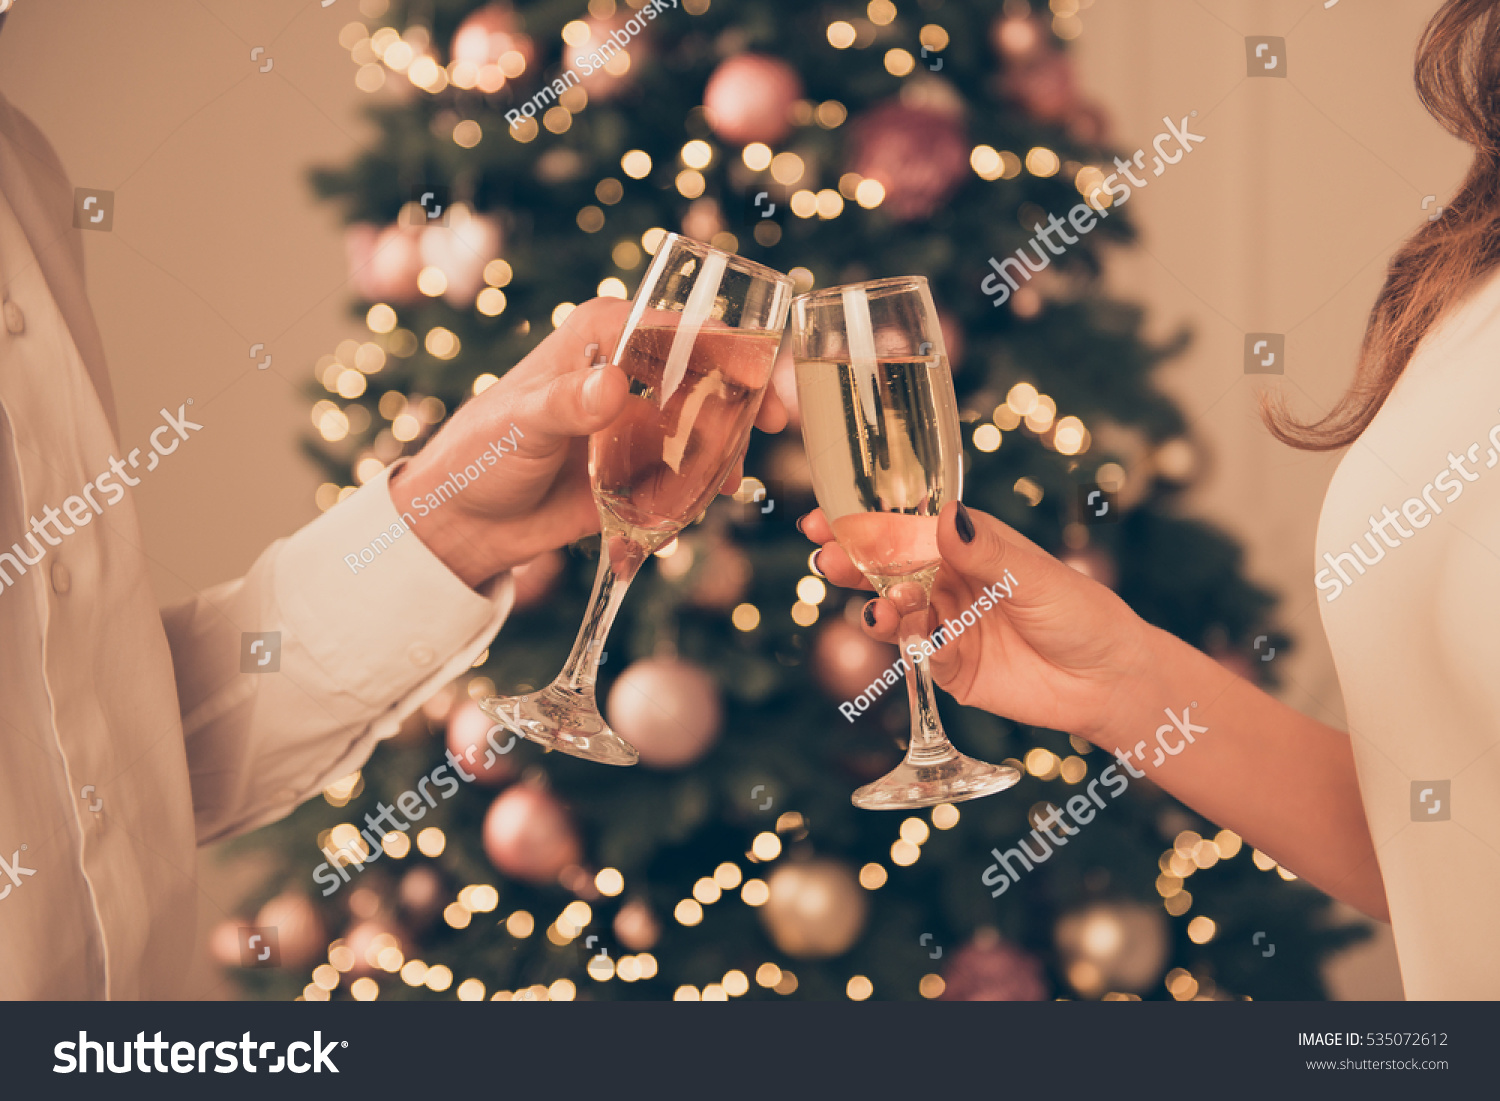 Cheers!Close up photo of two people holding glasses of shampagne on xmas #535072612